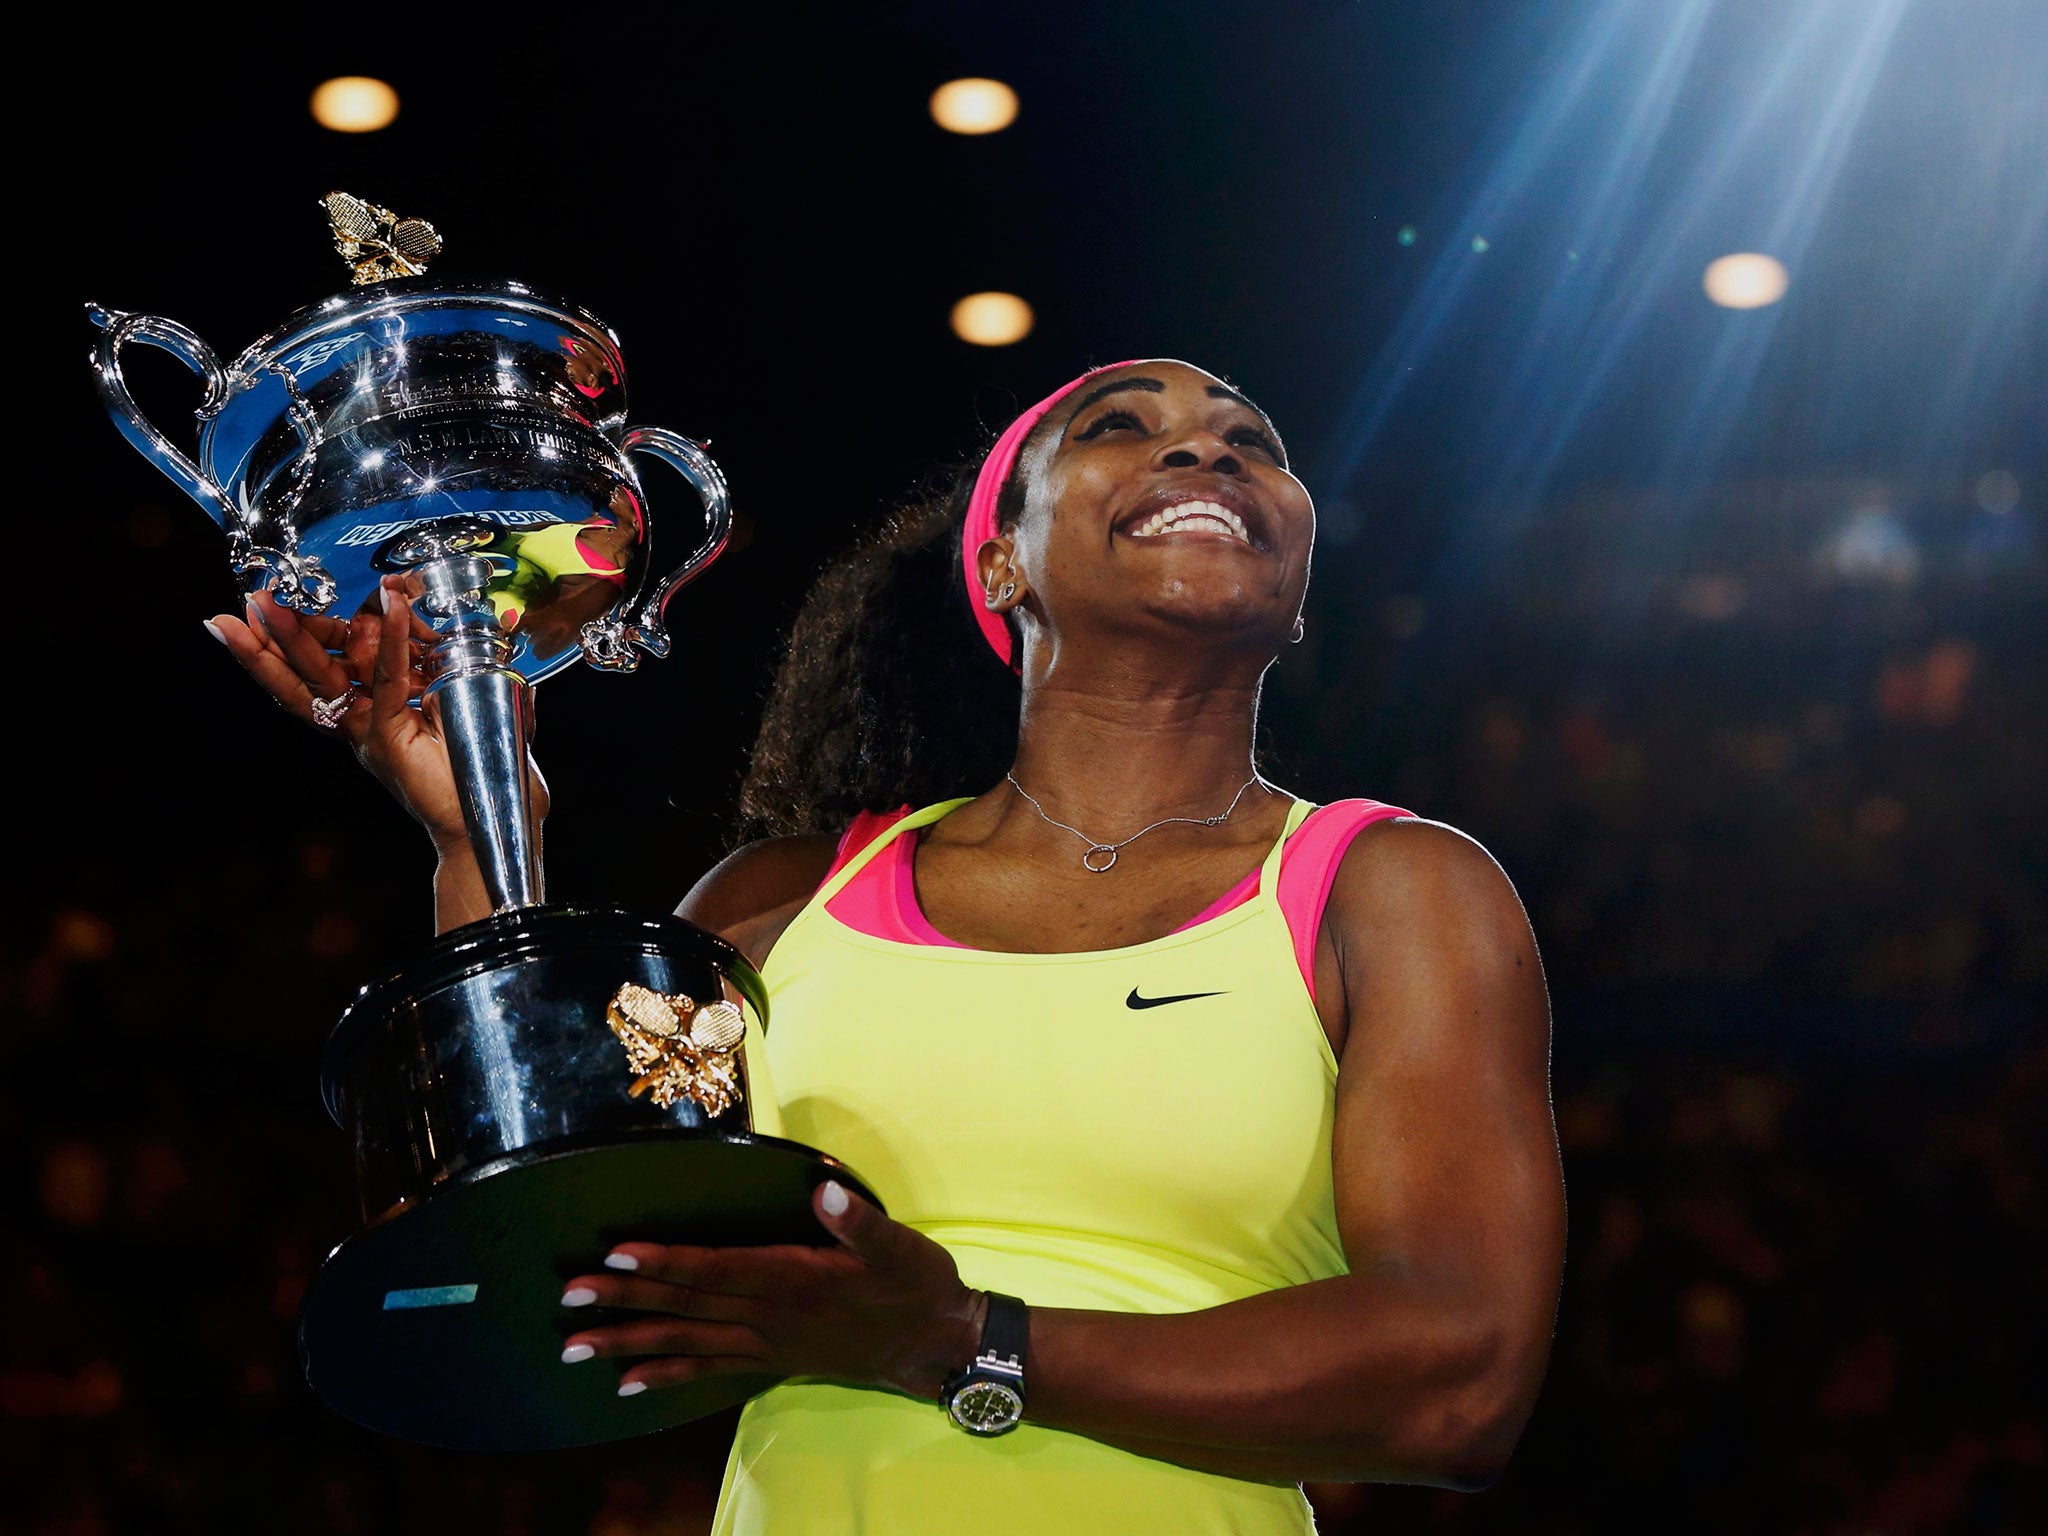 31 Janaury 2015: Serena Williams of the U.S. poses with her trophy after defeating Maria Sharapova of Russia in their women's singles final match at the Australian Open 2015 tennis tournament in Melbourne